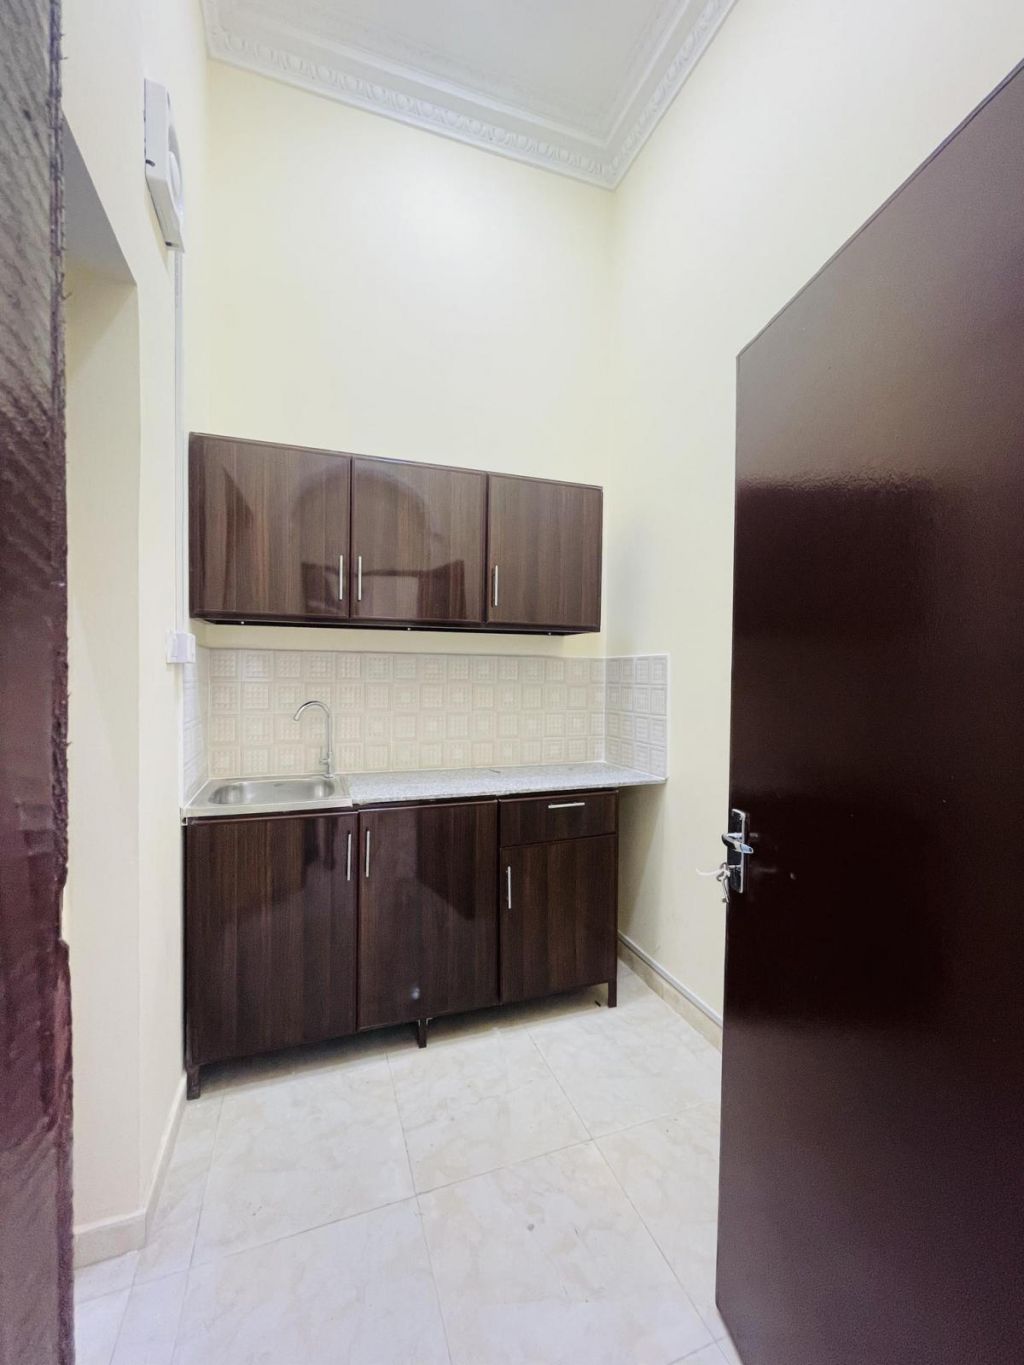 Residential Property Studio U/F Apartment  for rent in Al-Rayyan #14561 - 3  image 